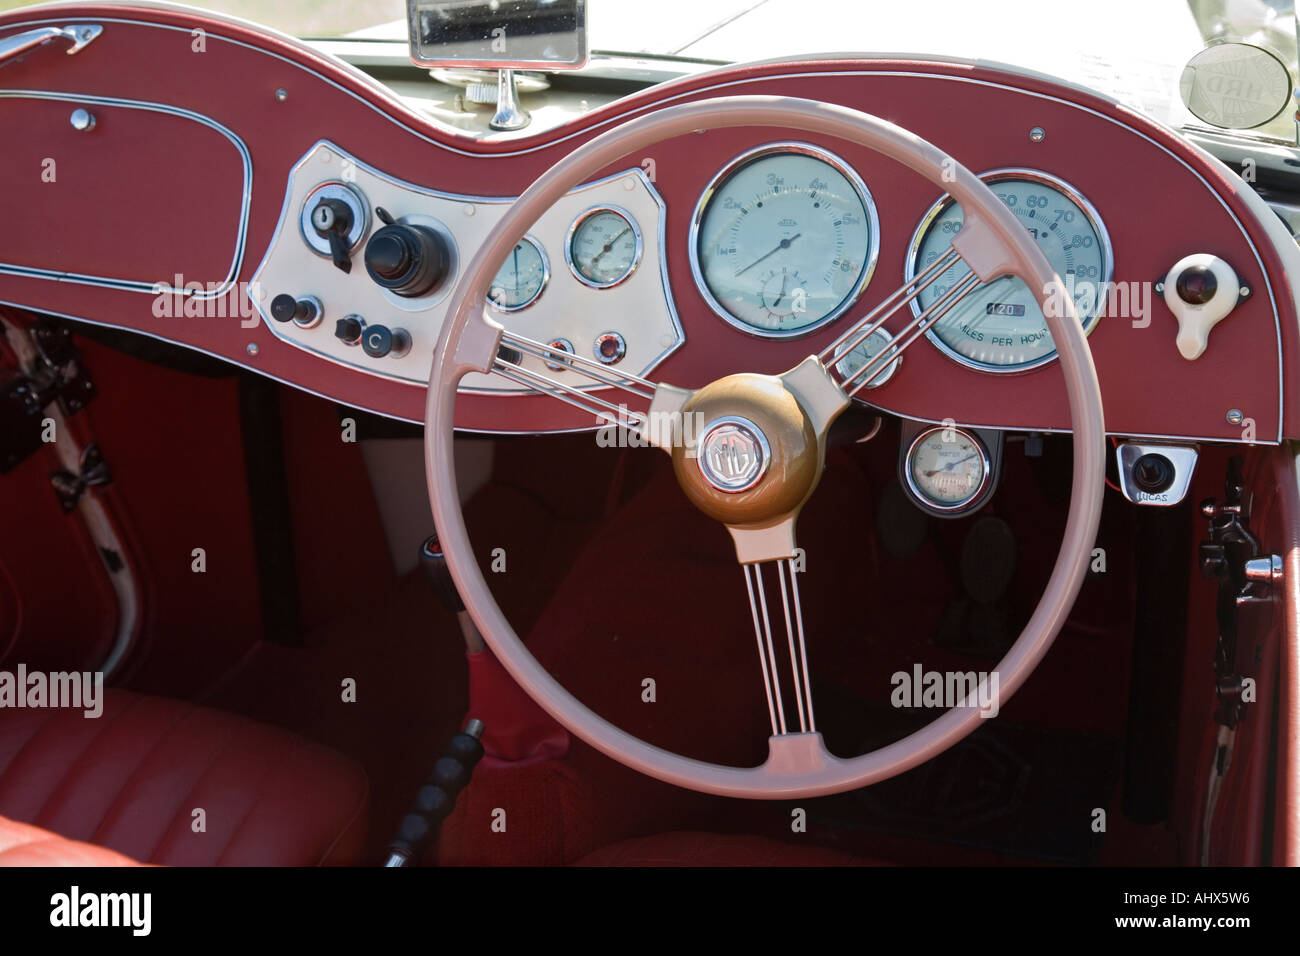 Classic 1929 Humber 9 28 MG  open top sports car dashboard with gauges and steering wheel white bodywork with red trim Stock Photo